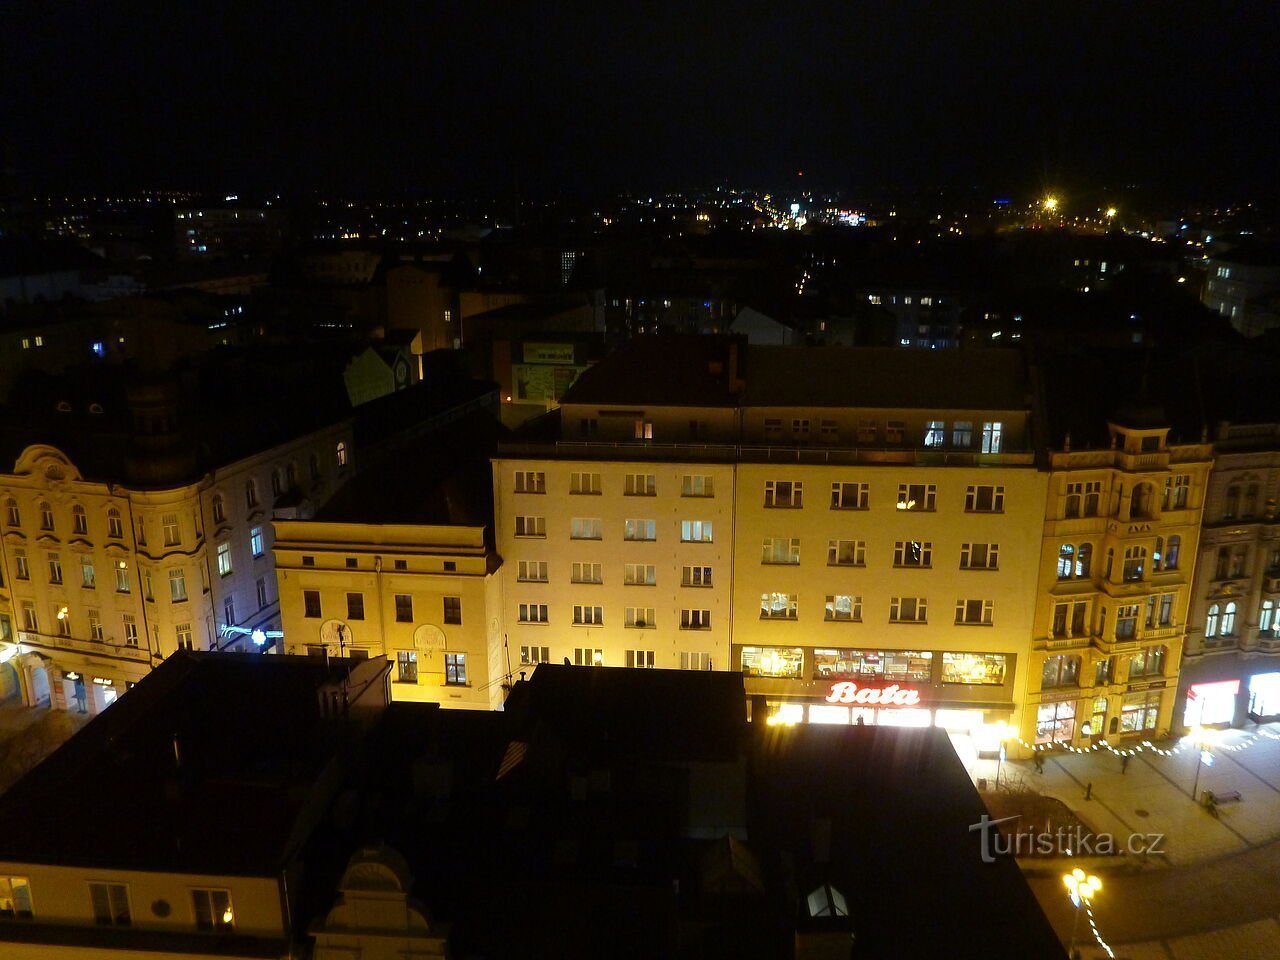 View of the Christmas illuminated Opava from